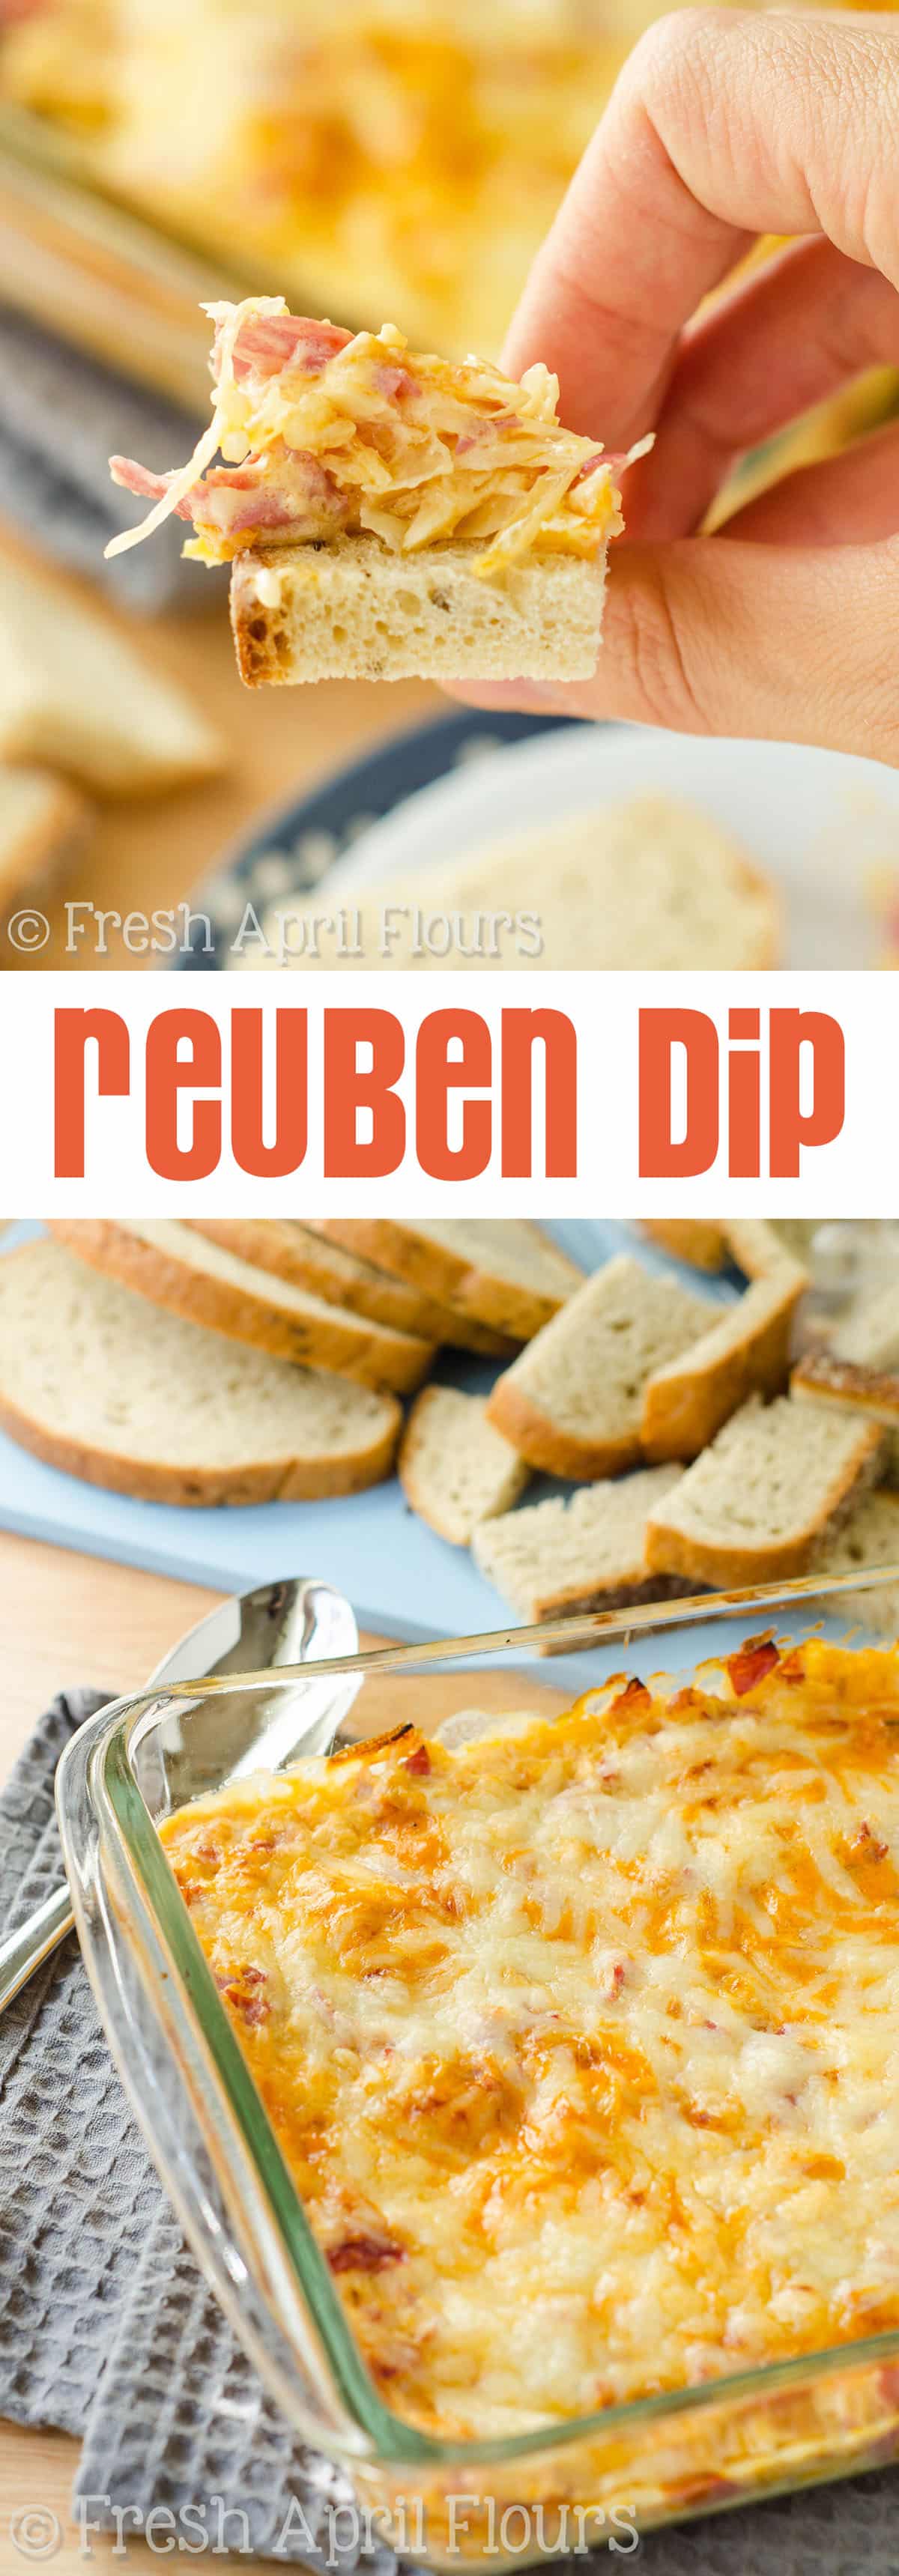 Reuben Dip: Loaded with corned beef, sauerkraut, Thousand Island dressing, and plenty of cheese, this dip will be your new favorite way to enjoy the classic sandwich-- in dippable form! via @frshaprilflours